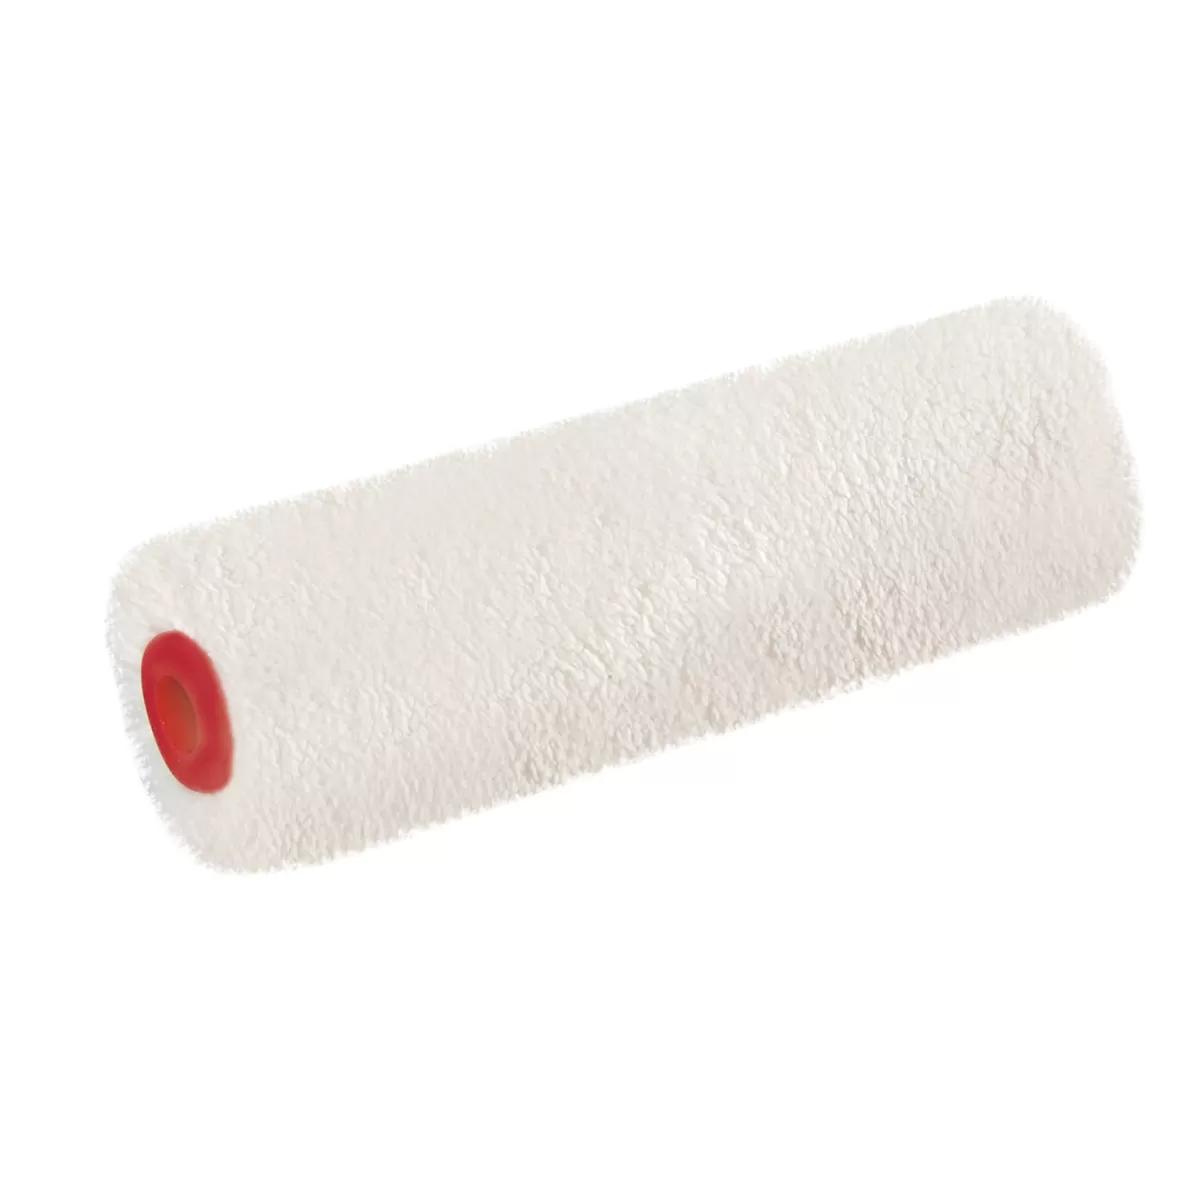 Small paint roller Microfiber 2 ¾